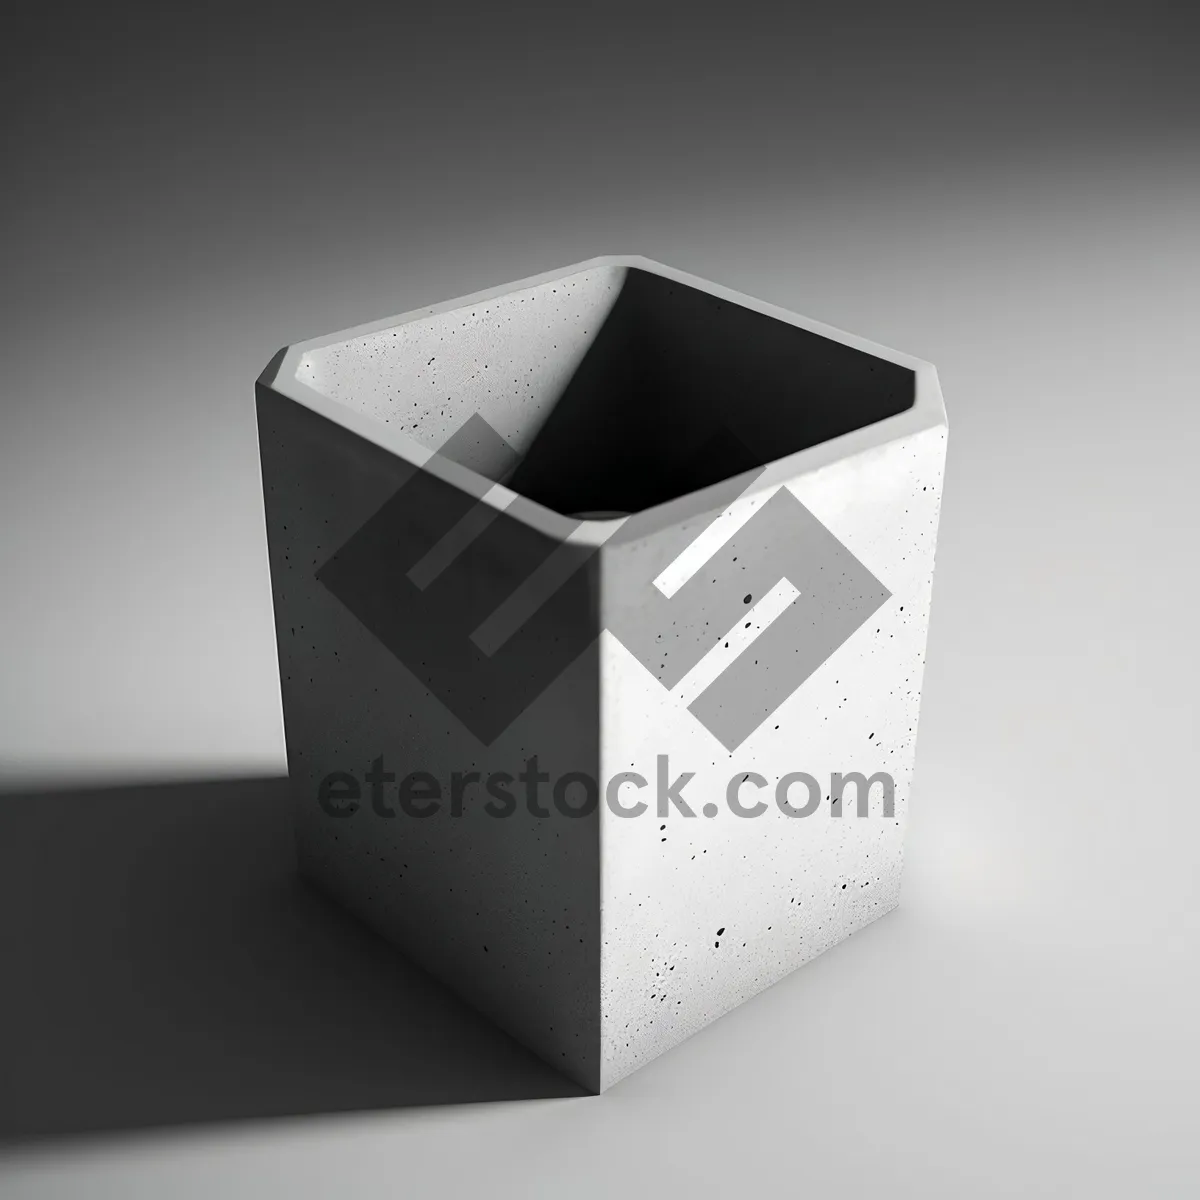 Picture of Open Carton Box - 3D Rendering of Empty Packaging